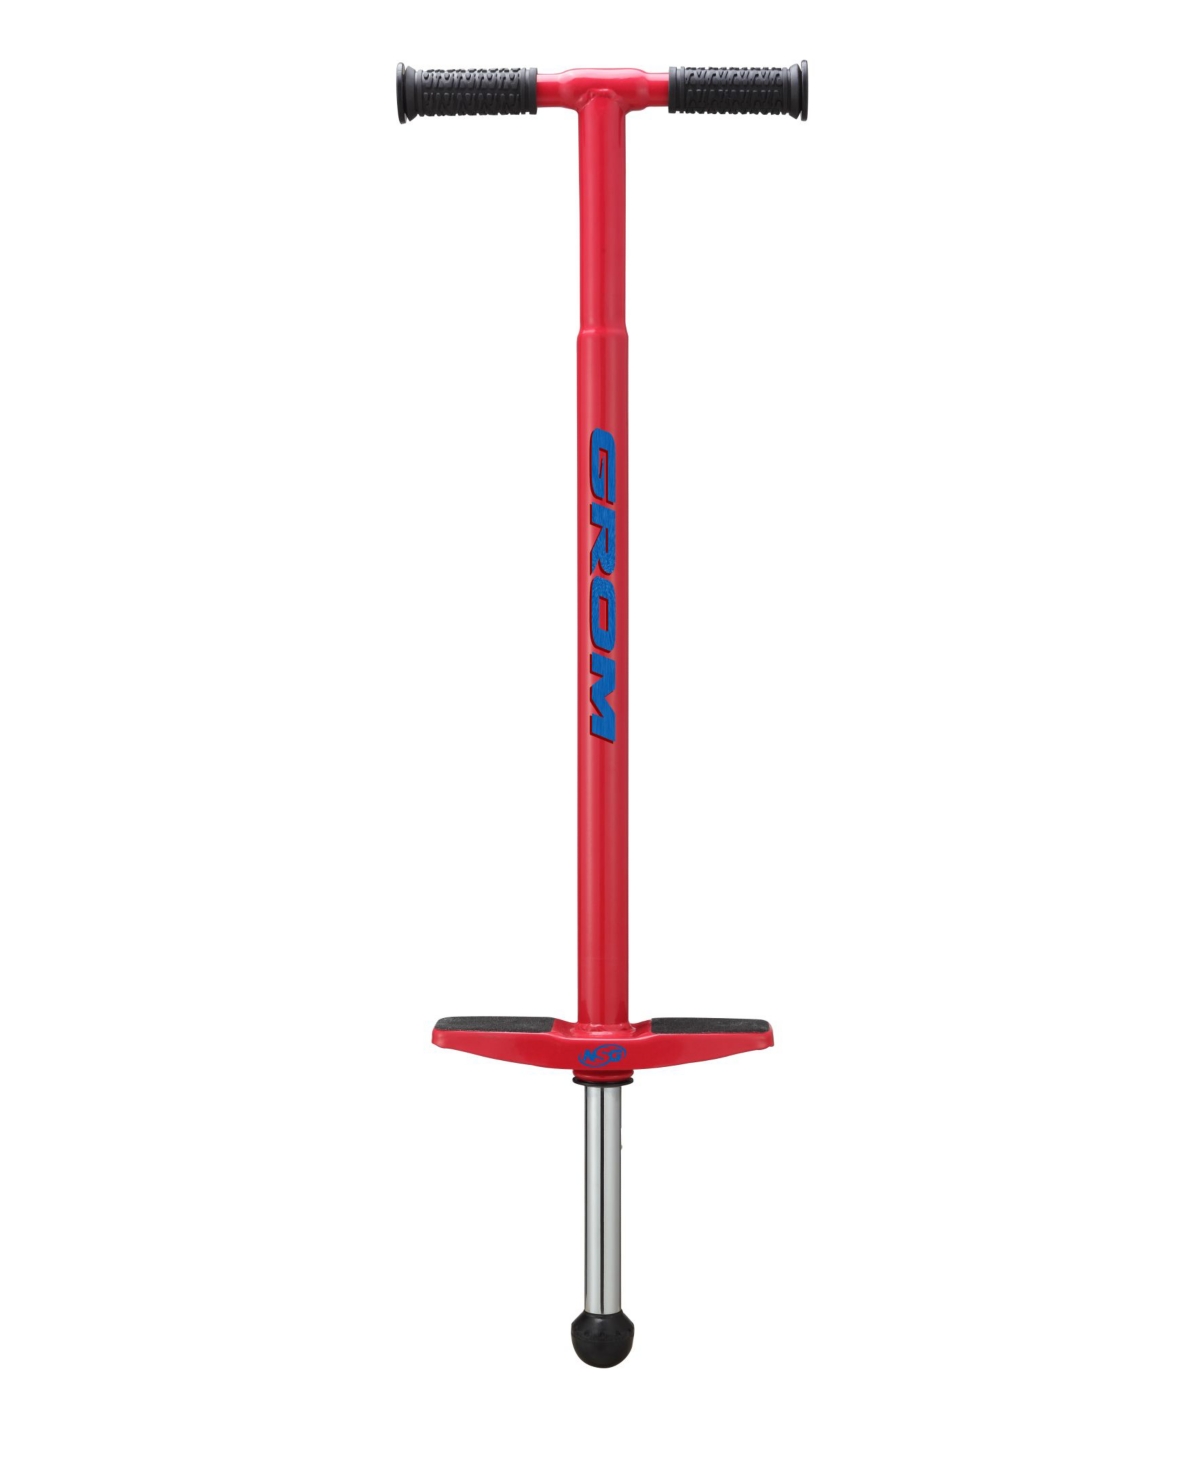 Nsg Grom Classic Pogo Stick In Red